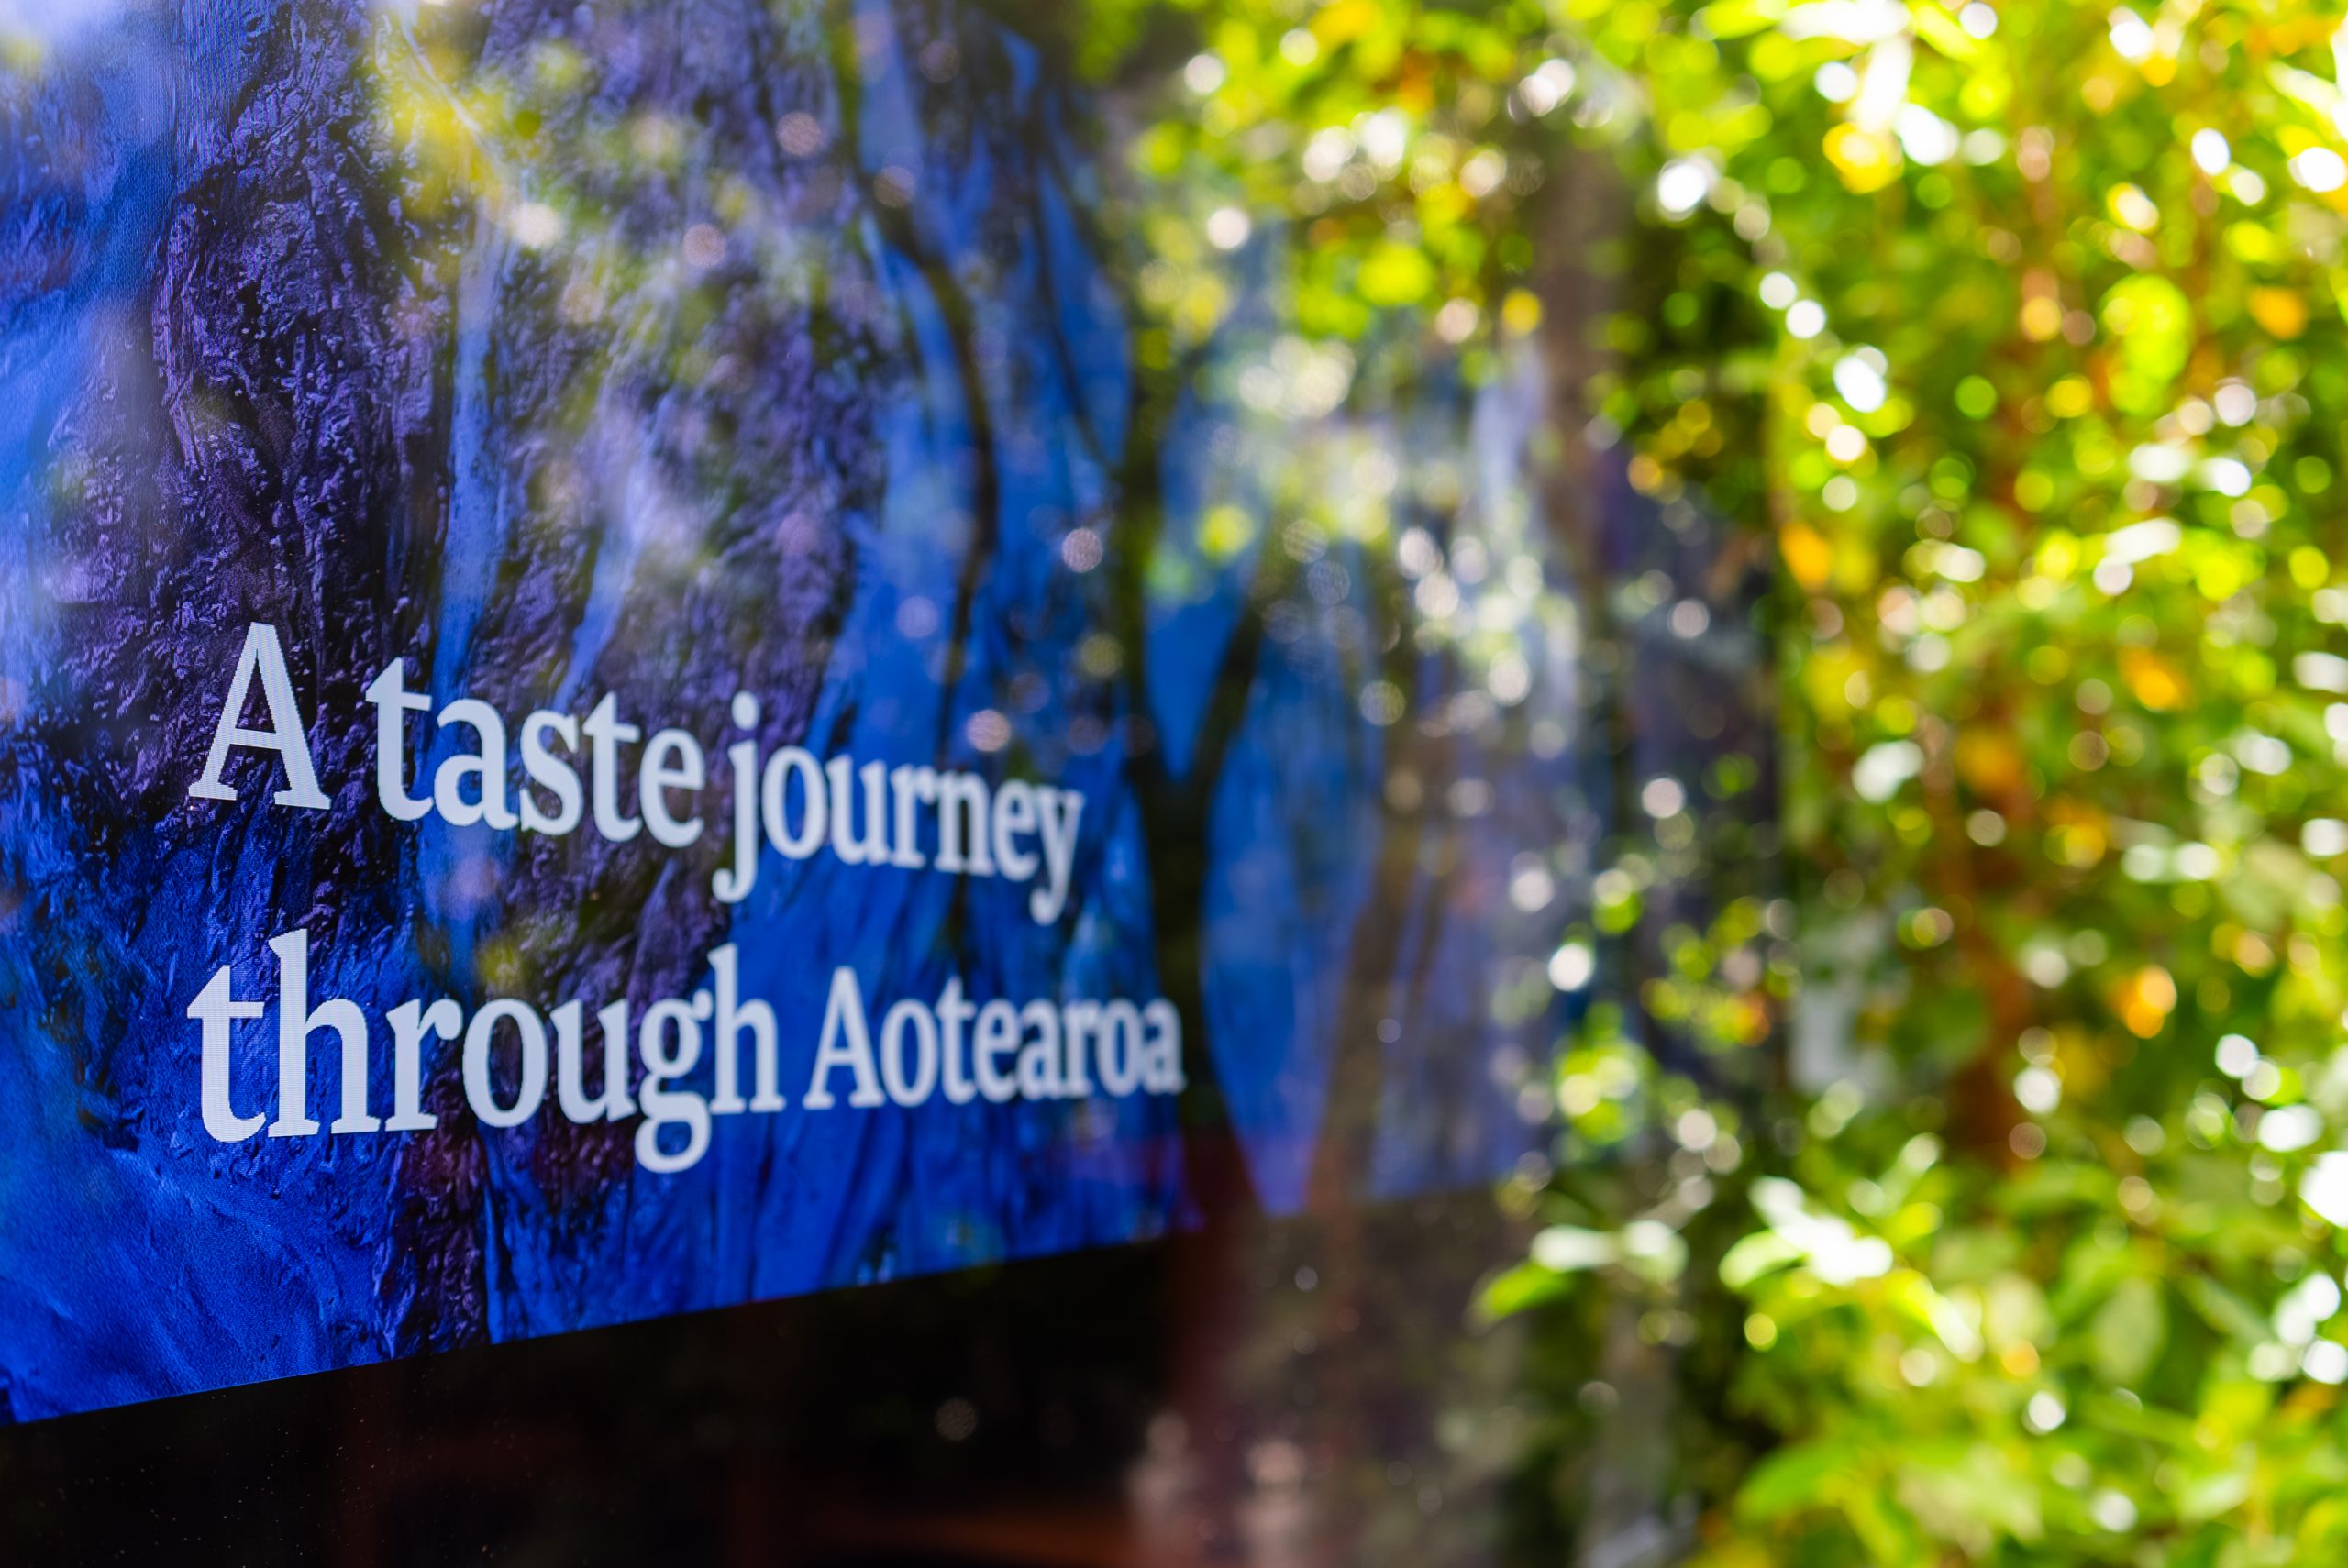 Air New Zealand elevates in-flight dining with 'A Taste of Aotearoa'